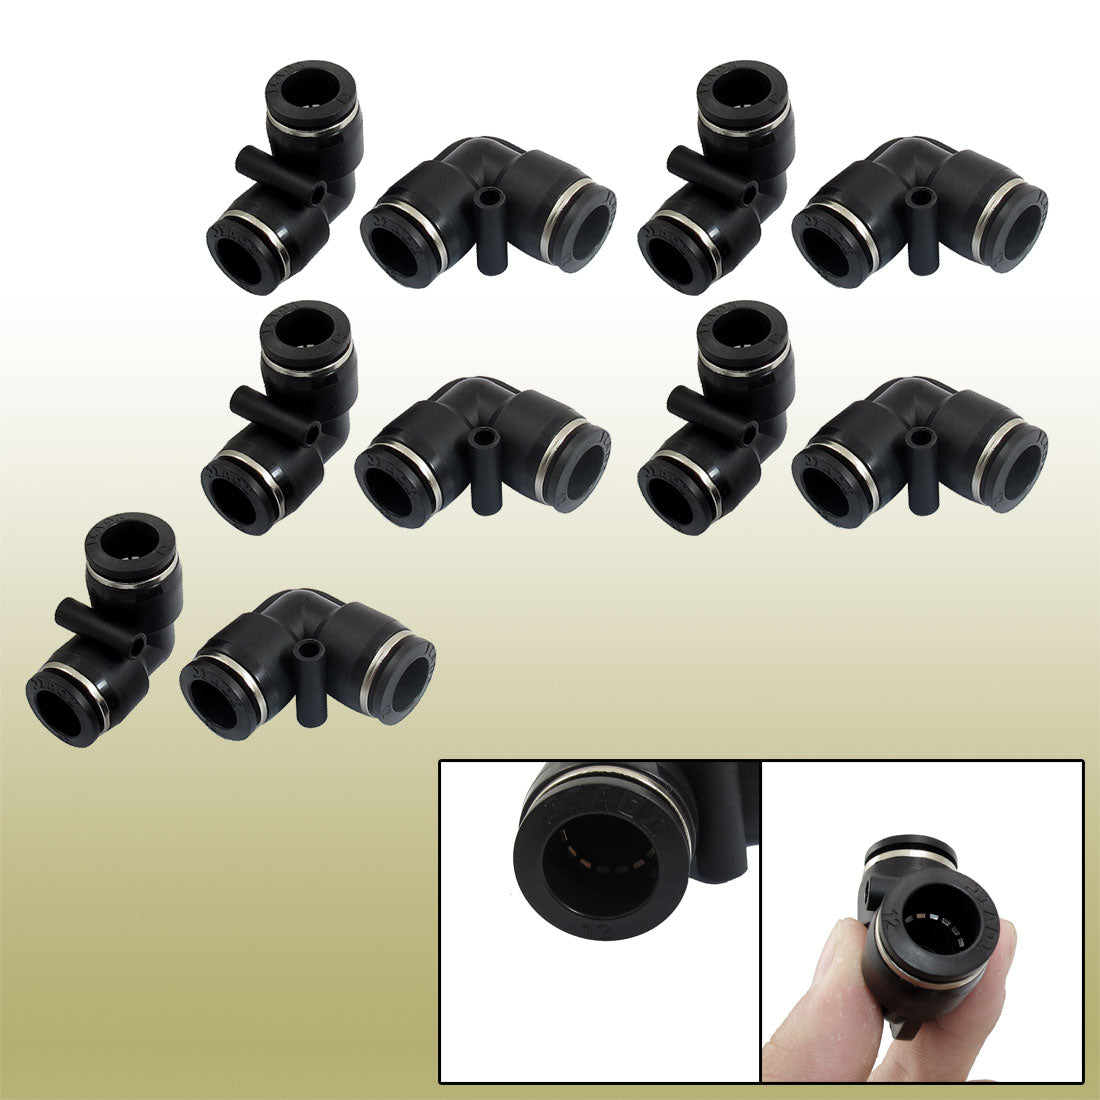 uxcell Uxcell 10 Pcs Air Pneumatic 12mm to 12mm L Shaped Push in Elbow Connector Fittings